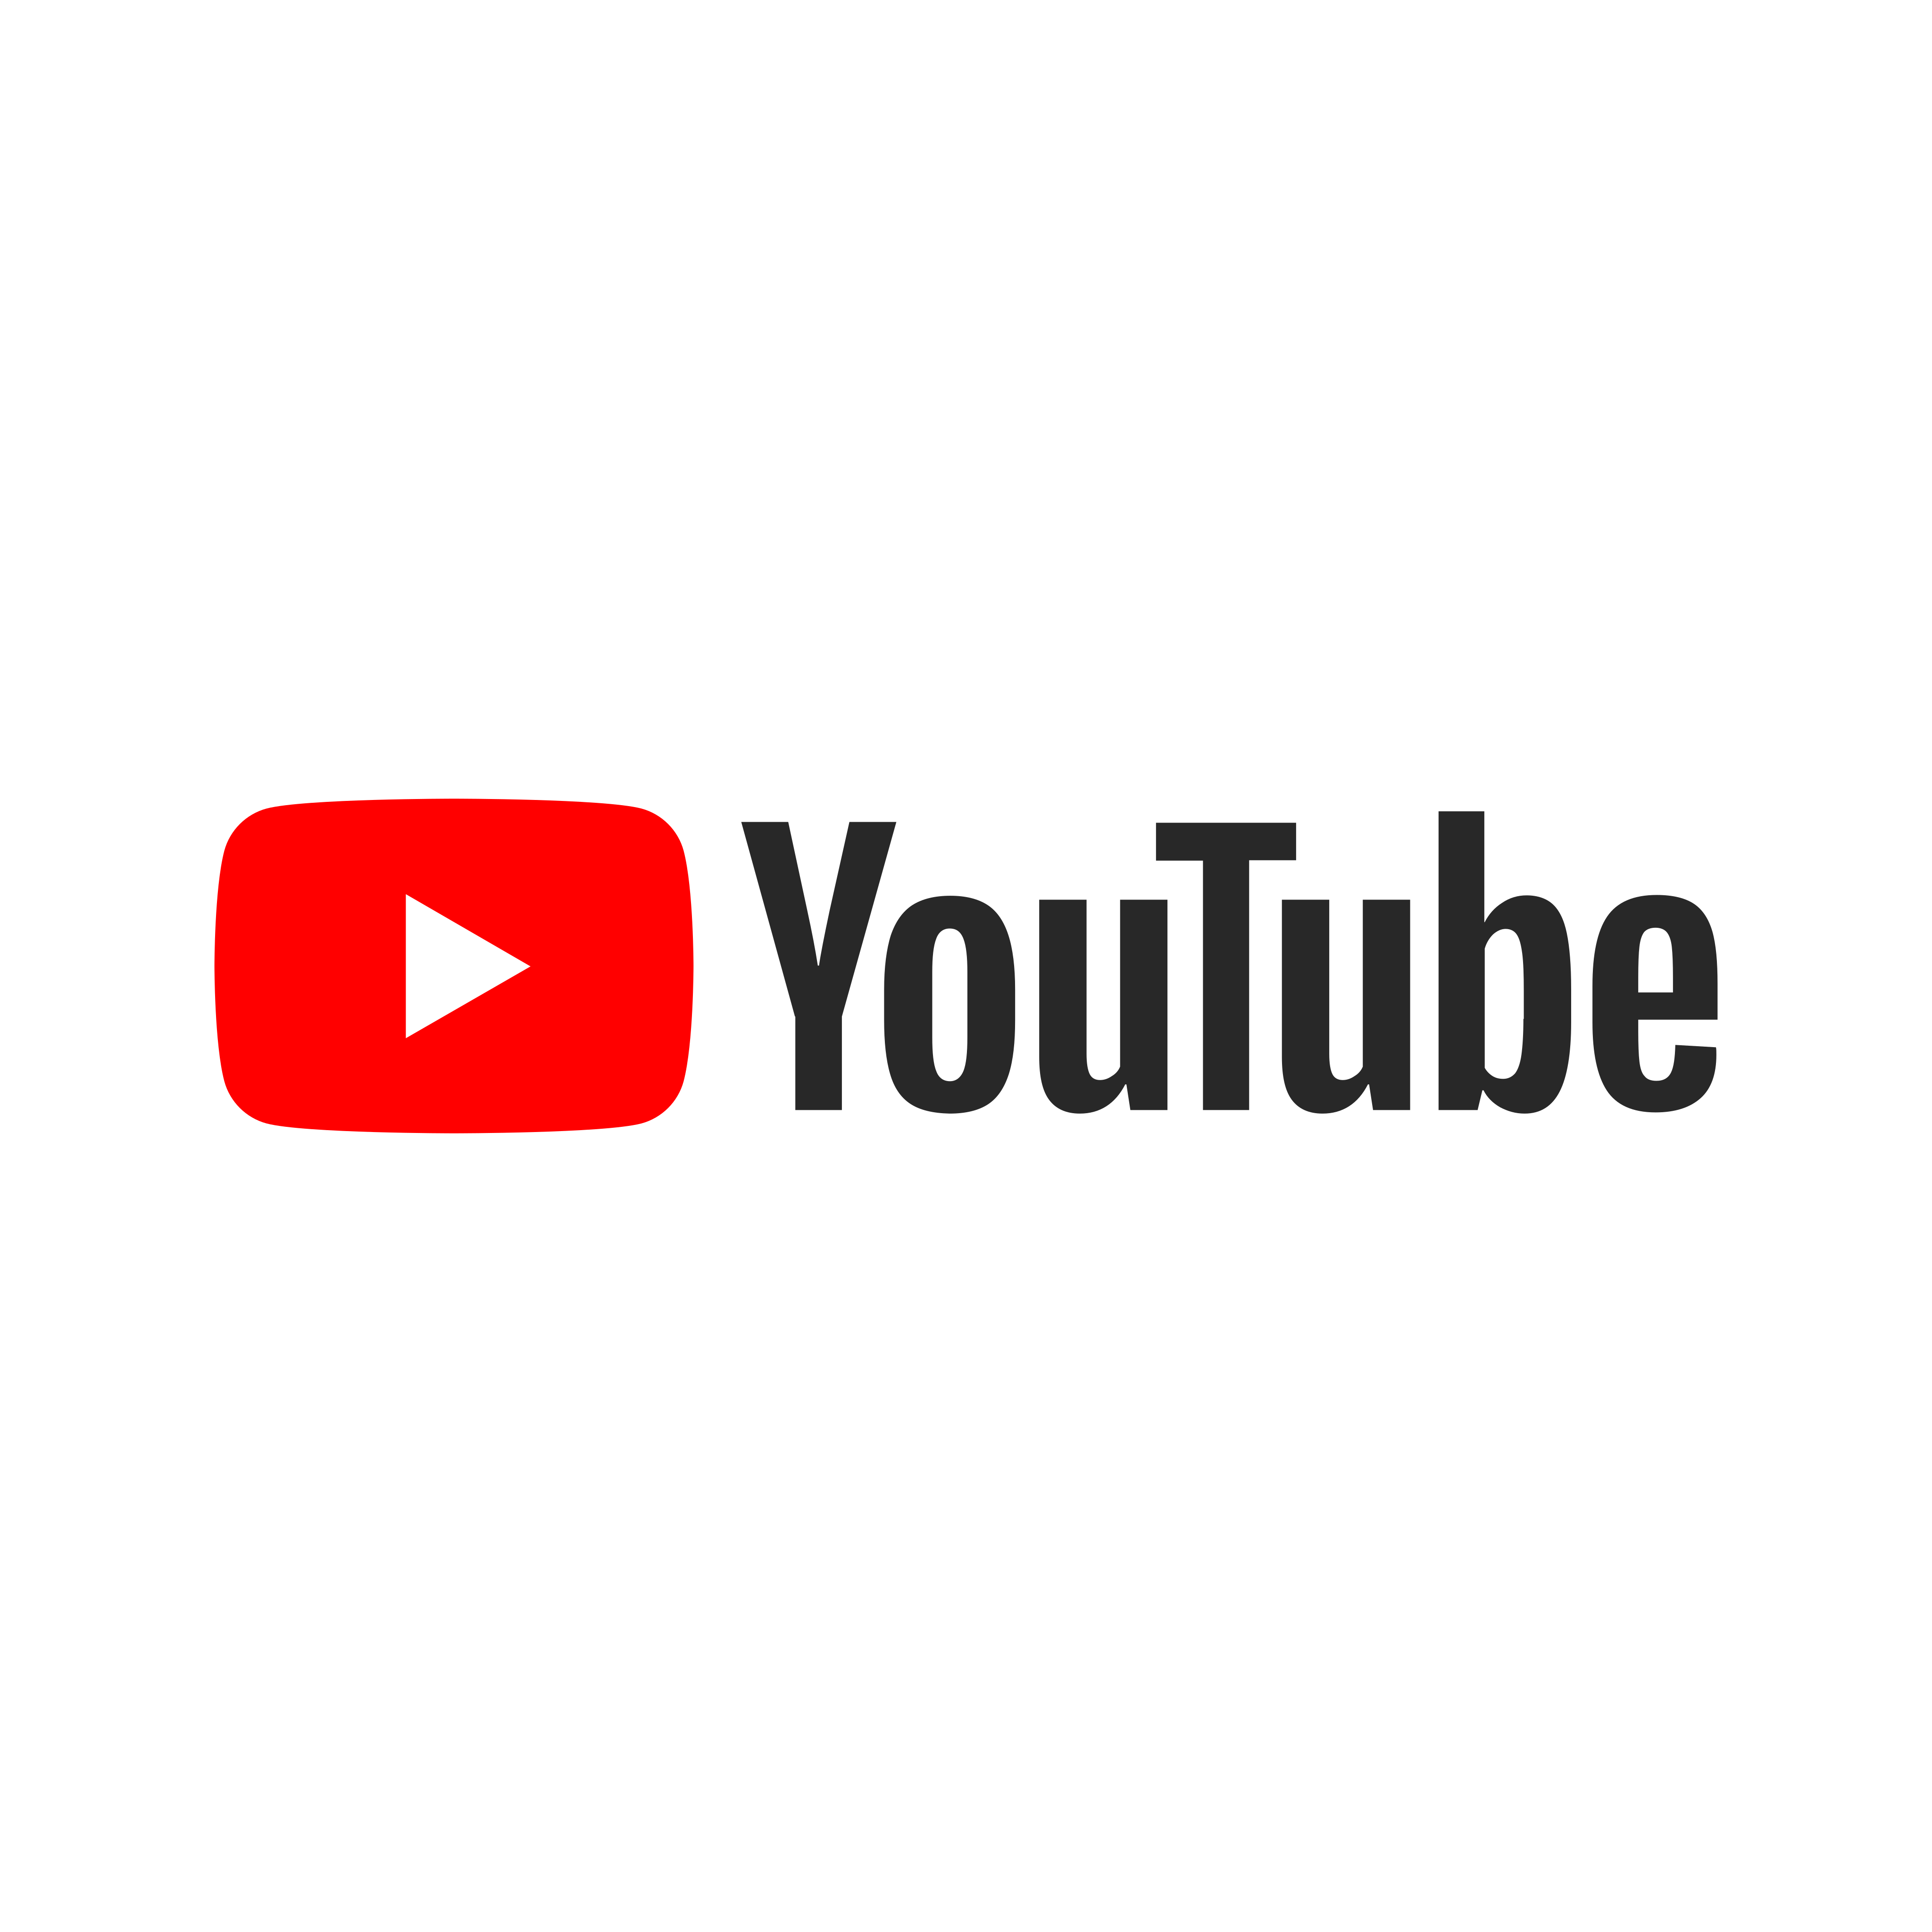 Youtube Logo Transparent Png Pictures Free Icons And Png Images | Sexiz Pix